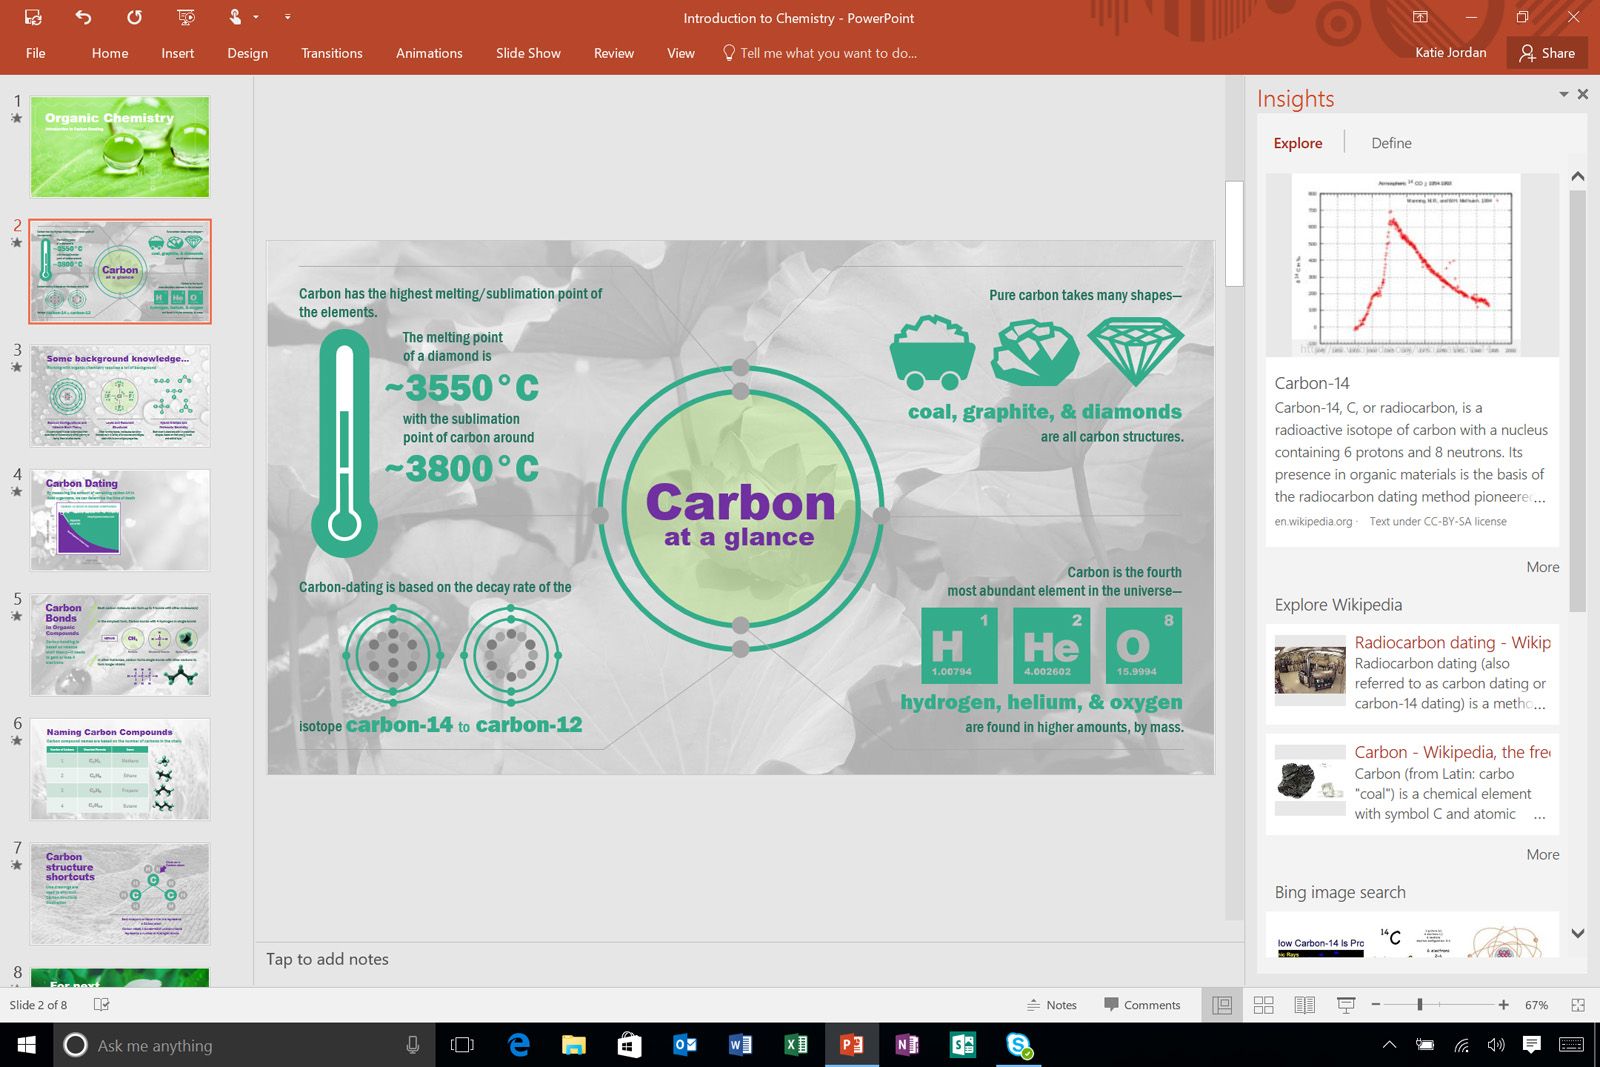 office 2016 for windows 10 now available how to get it and key new features explained image 13